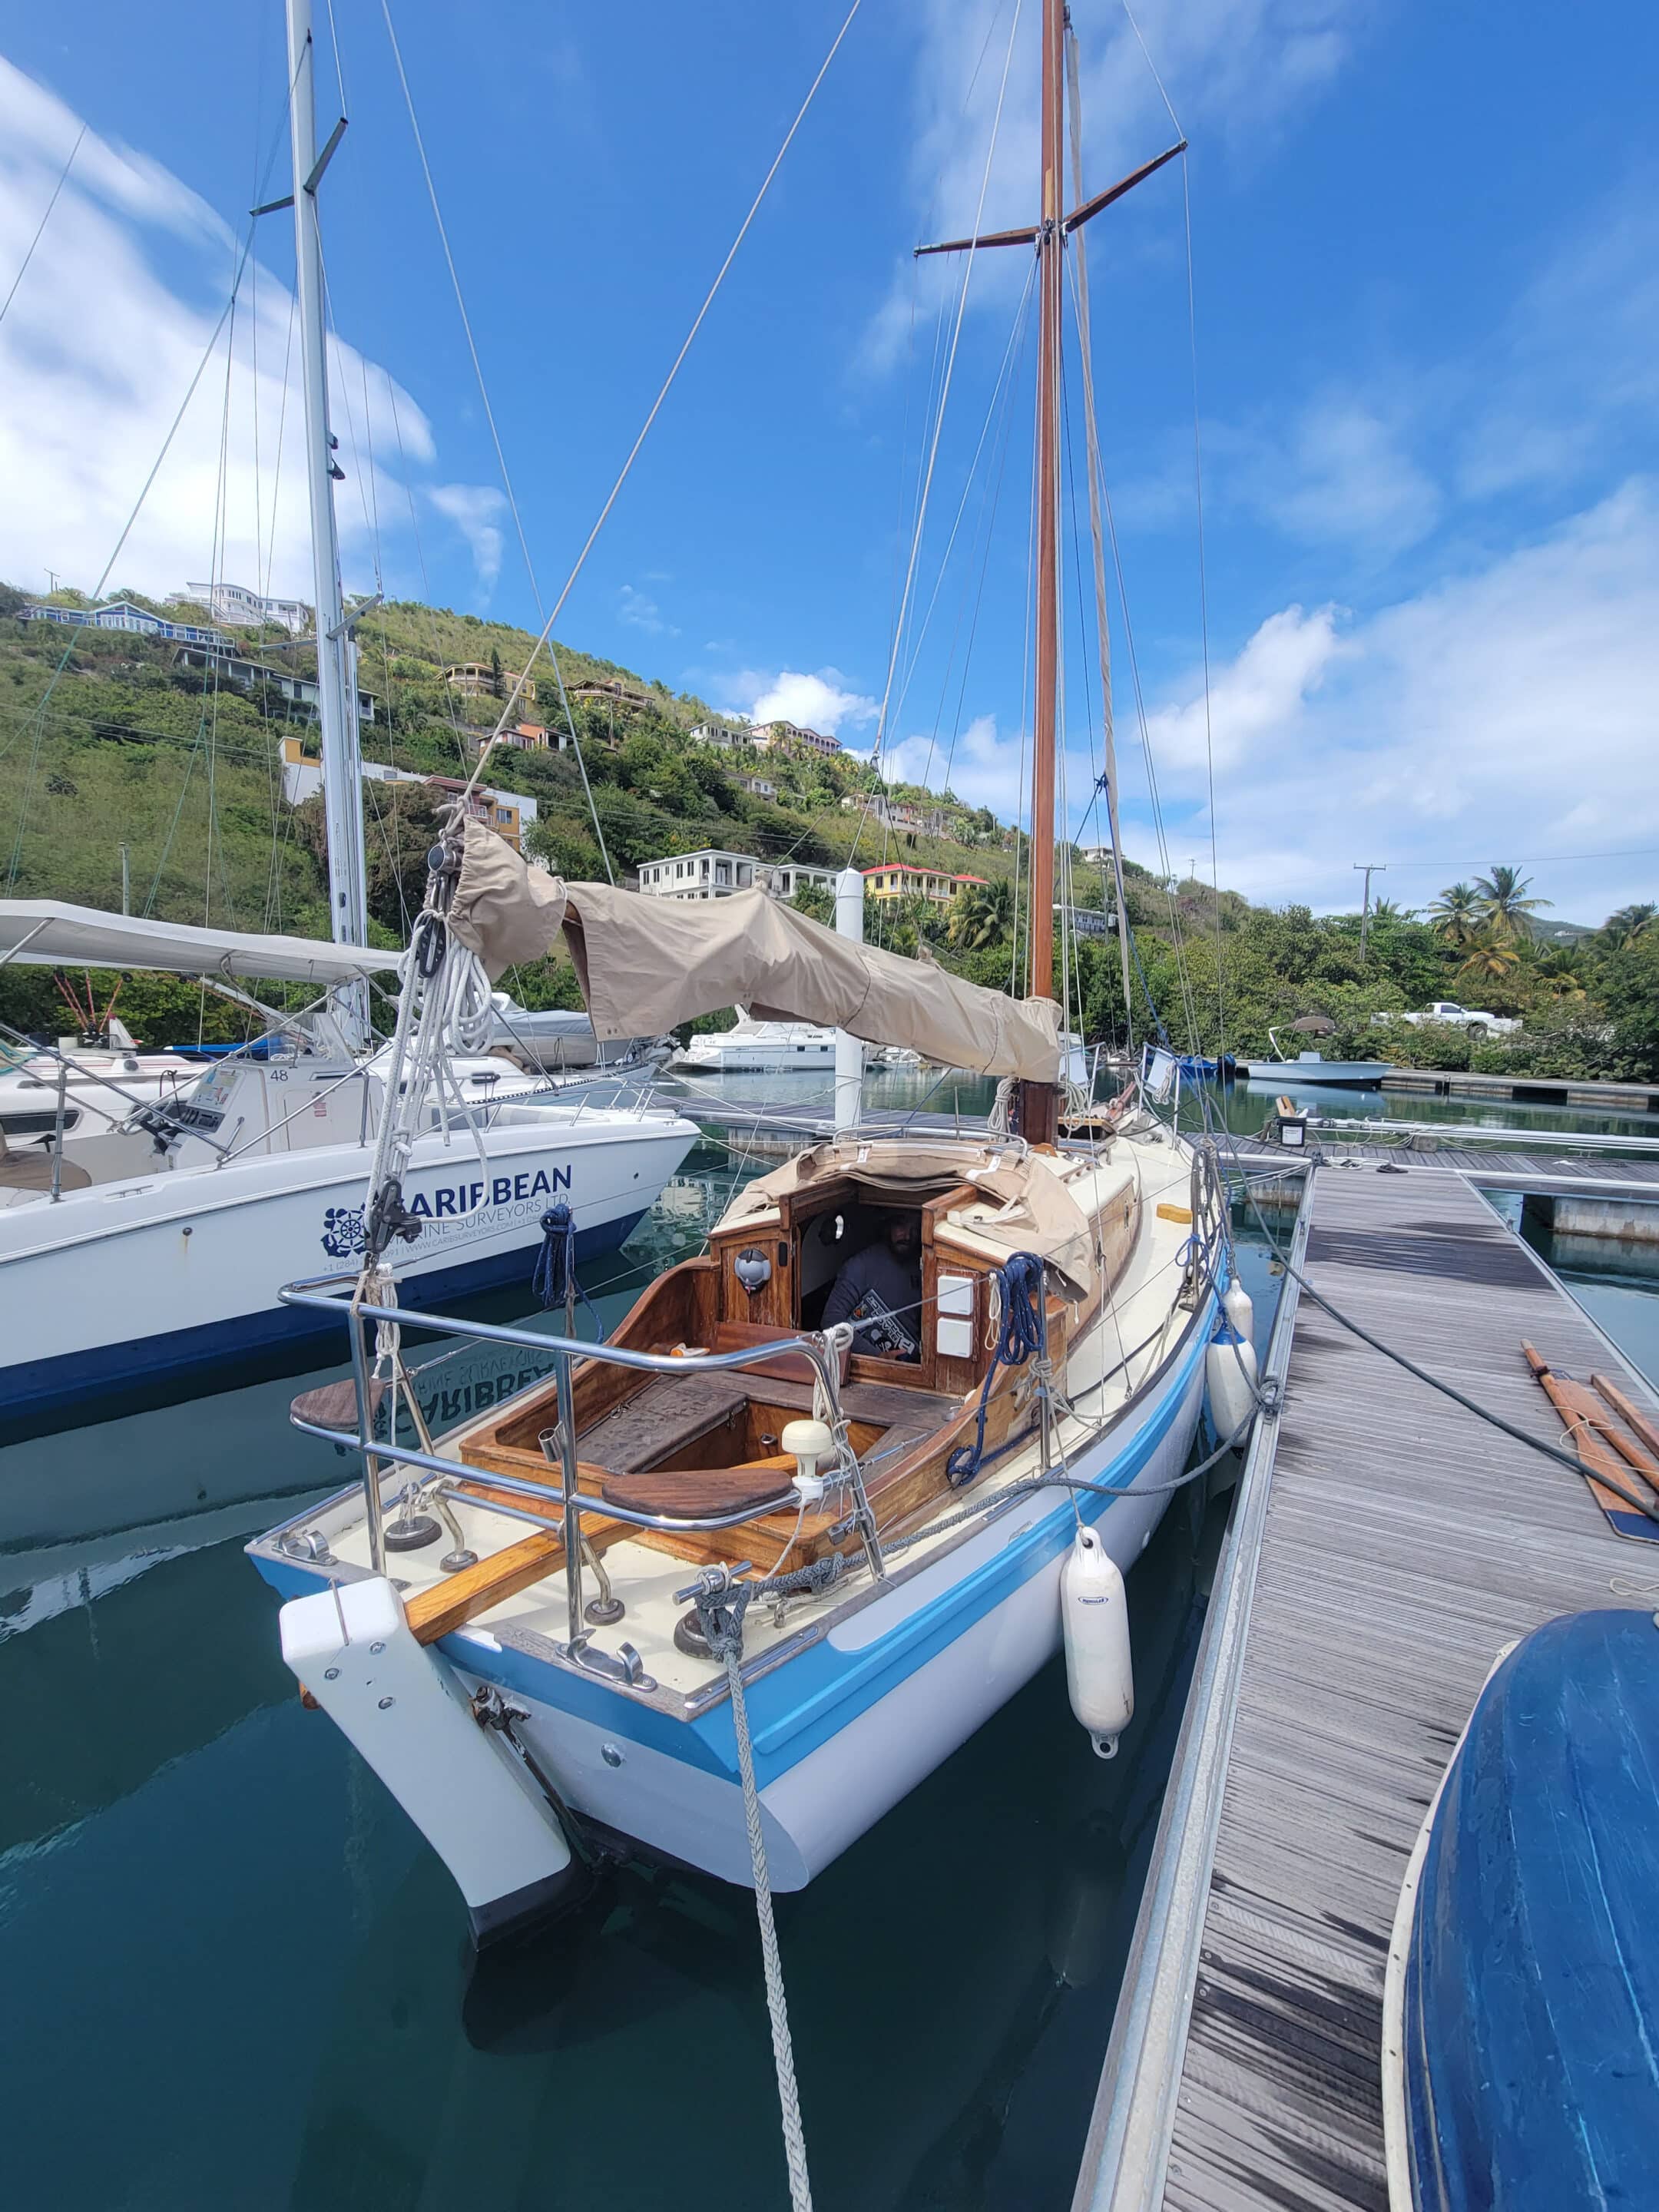 vertue 25 sailboat for sale